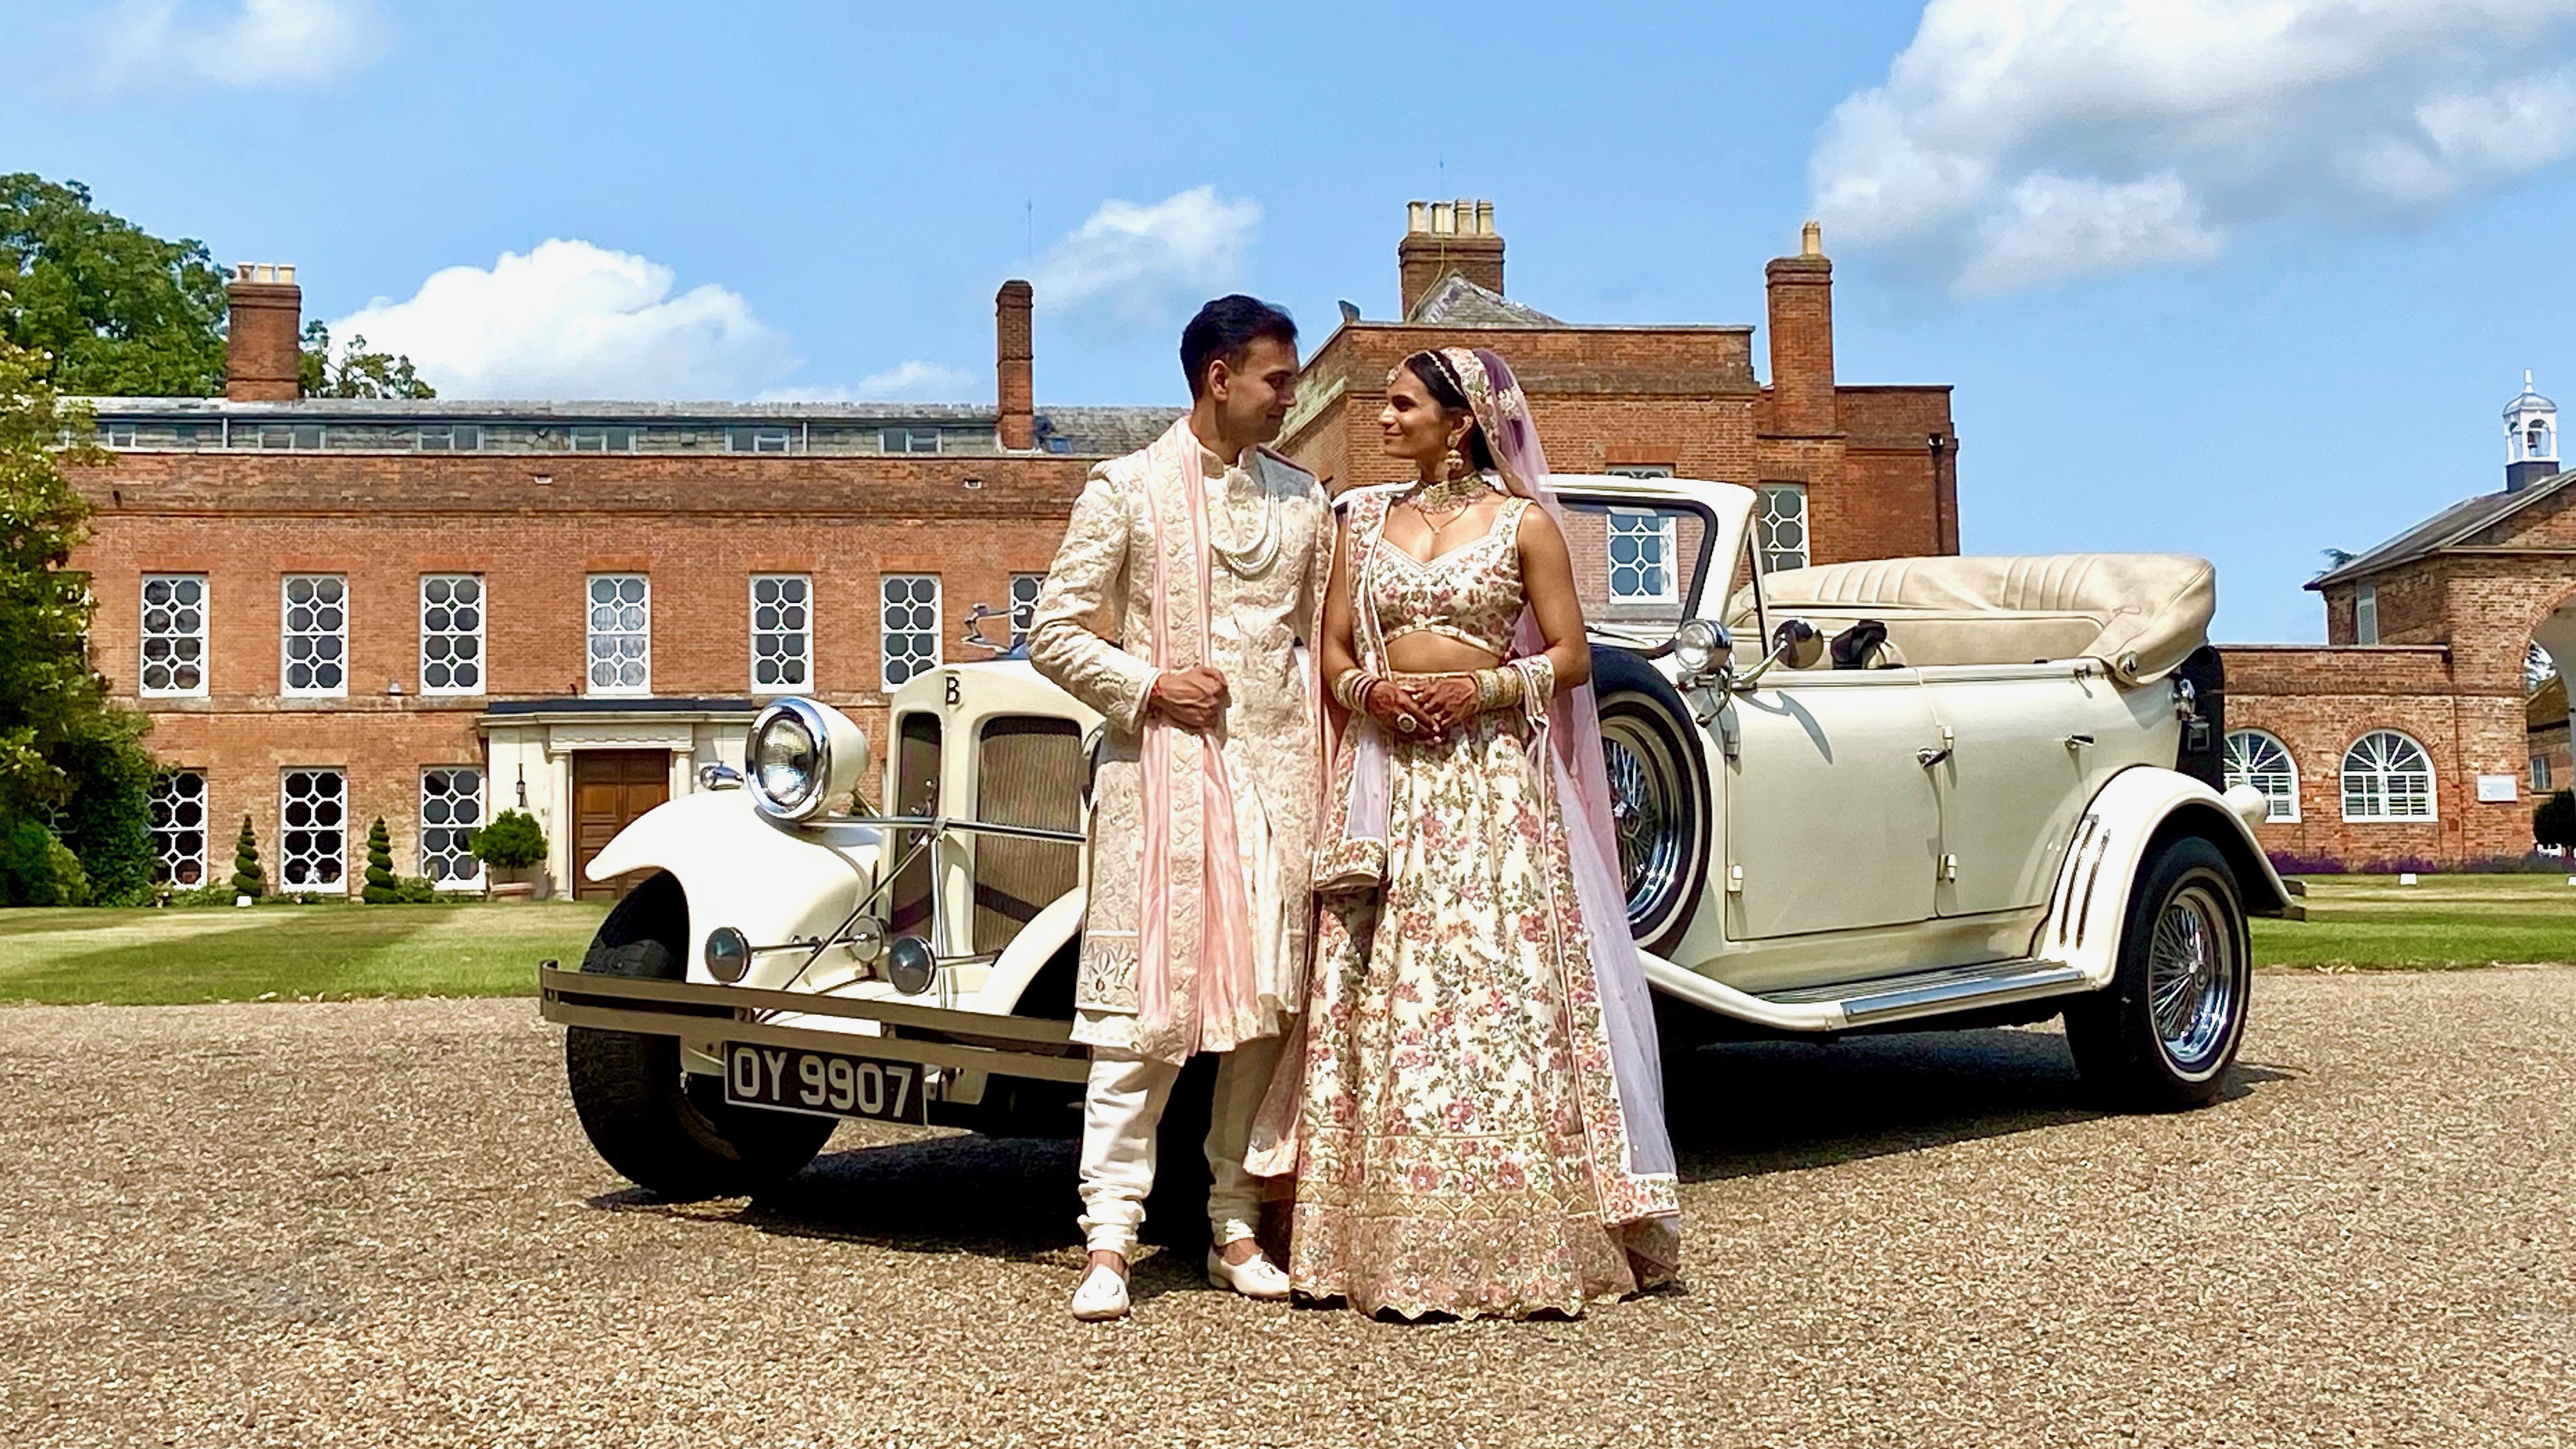 1930's vintage style Beauford in ivory with roof down. Asian Bride and Groom in their traditional outfit standing in front of the vehicle. Local Peterborough venue in the background.